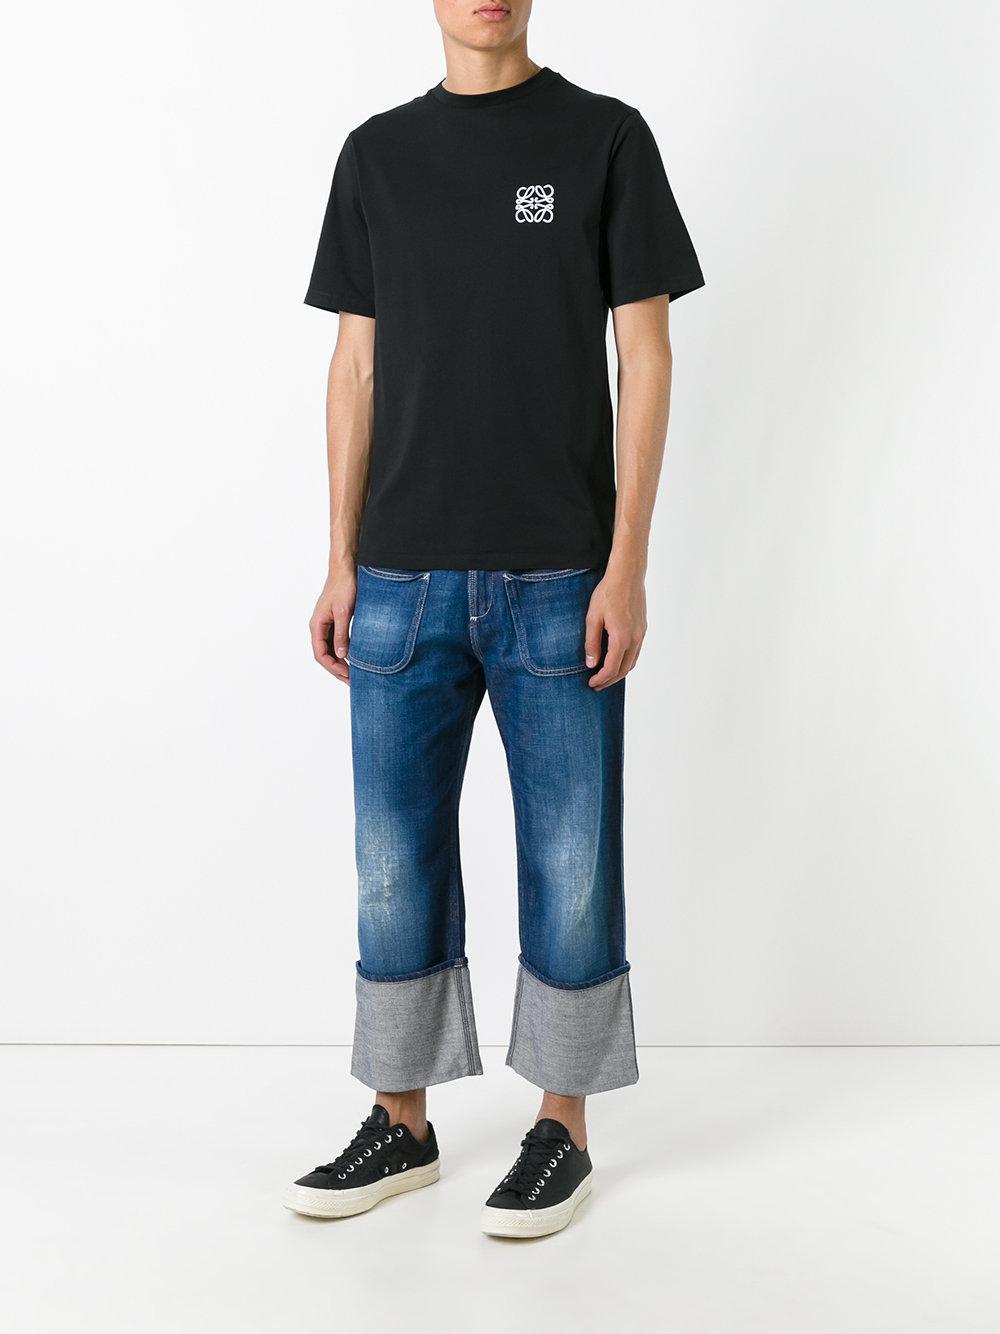 Loewe Logo Embroidered T-shirt in Black for Men - Lyst